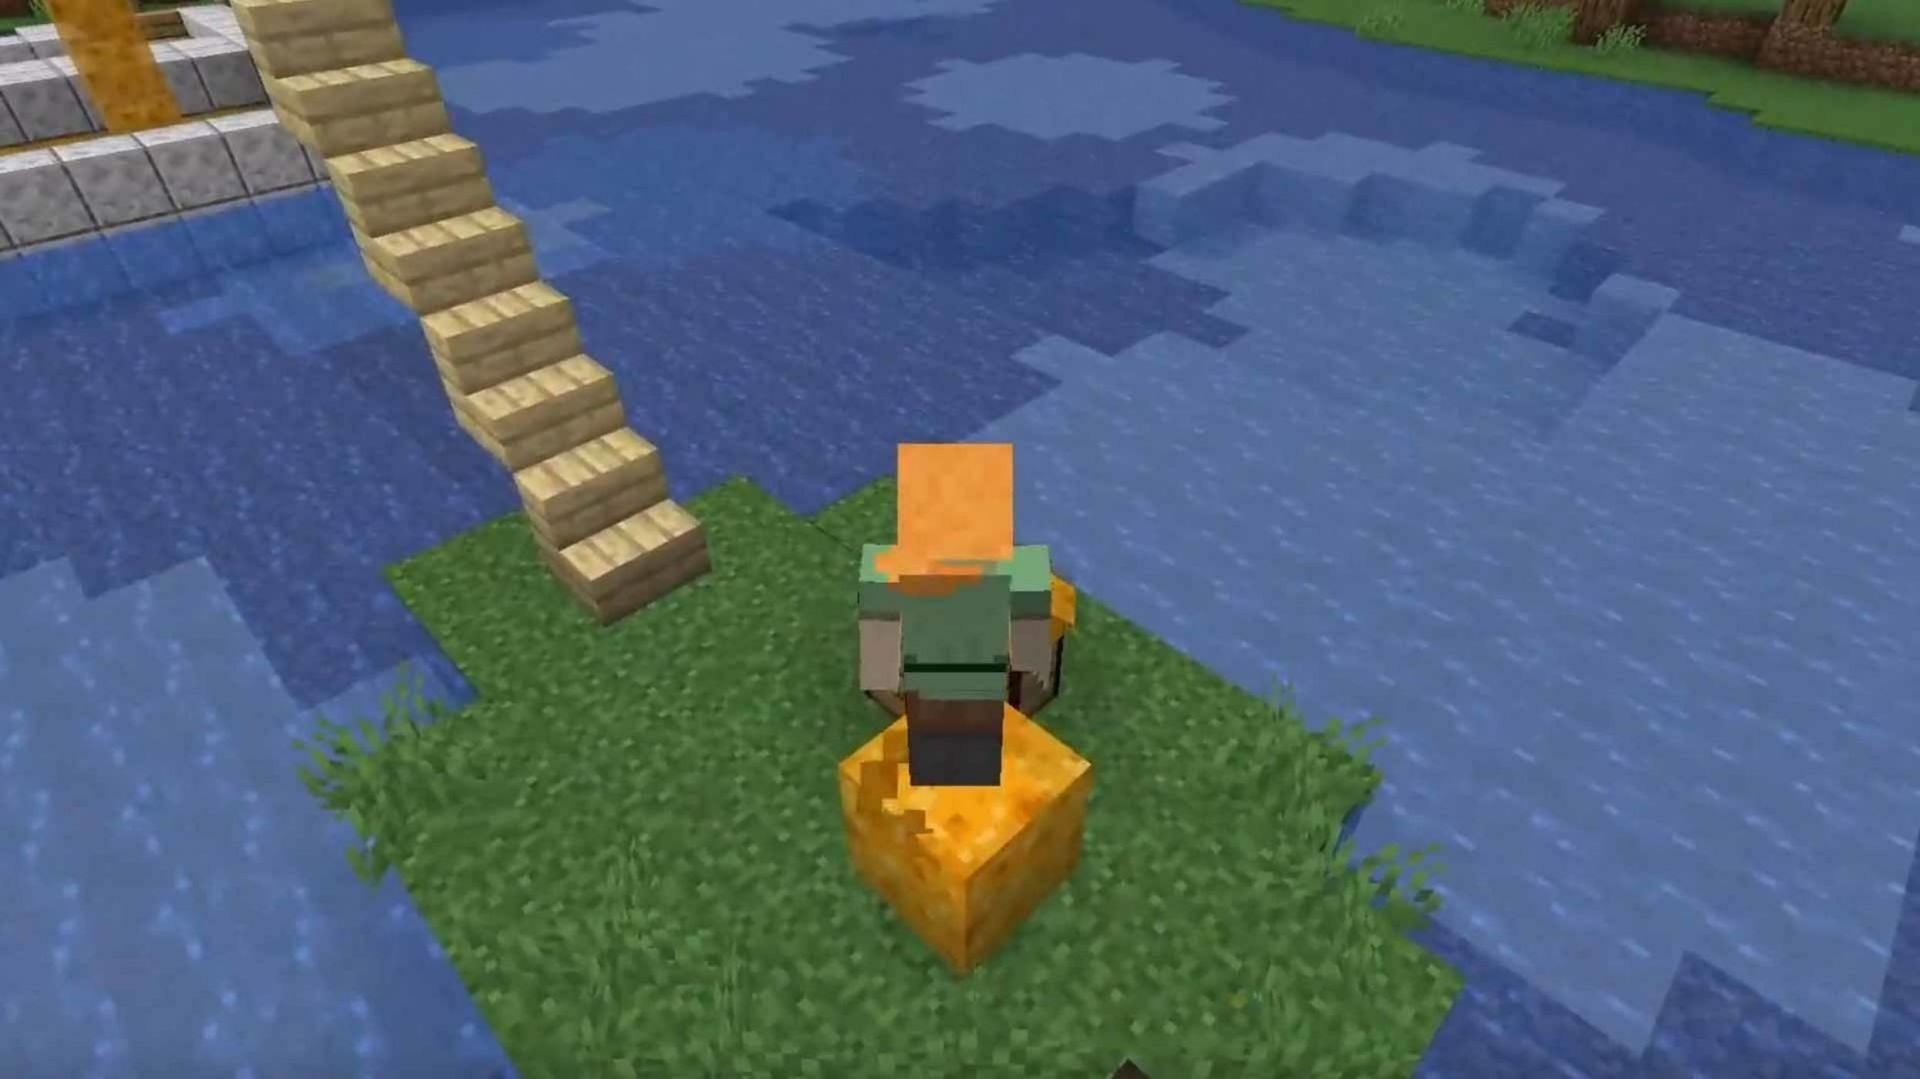 Honey blocks can be a player&#039;s best friend when descending a tall structure in the game (Image via Mojang)